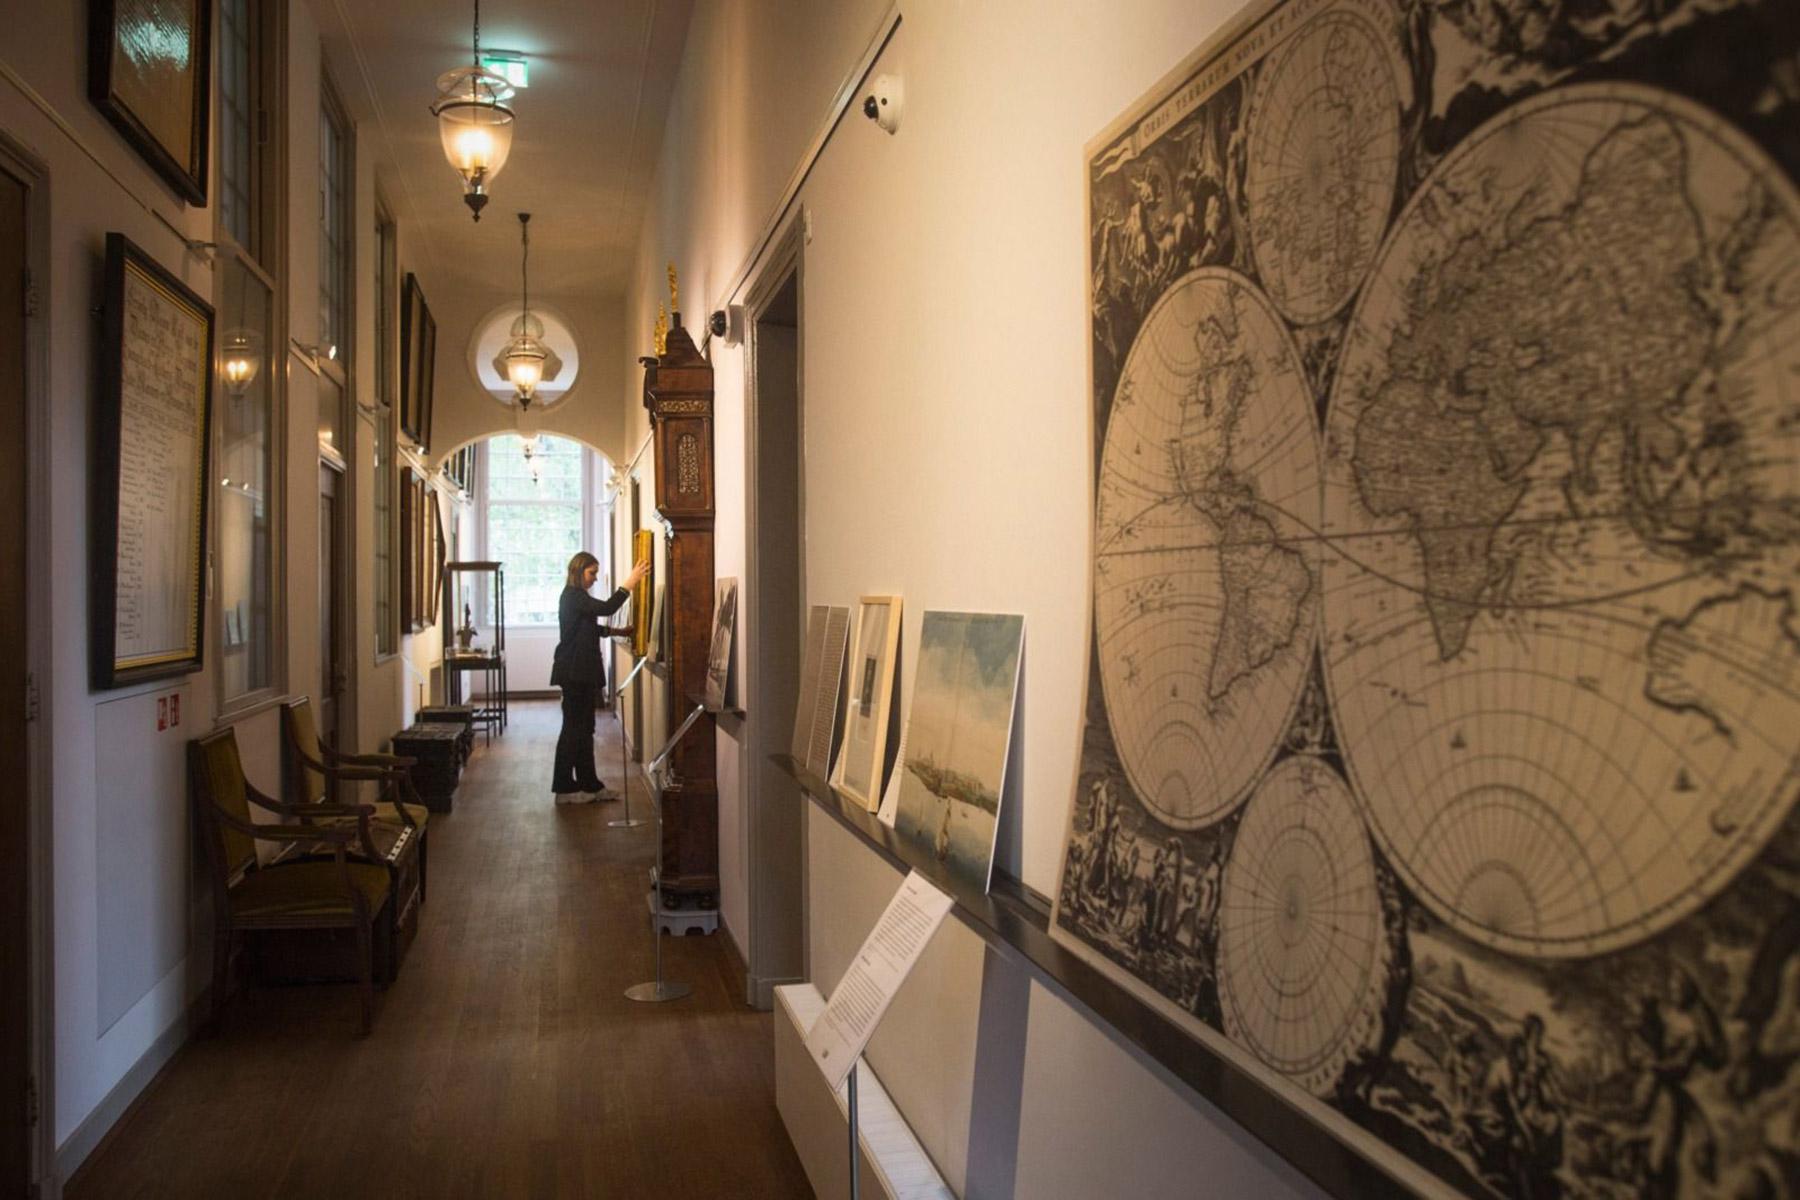 In Amsterdam, an exhibition titled “Luther & De Wereld” (Luther and the World) currently showcases local Lutheran history and the influence of Lutherans from the Netherlands worldwide. Photo: Luther Museum Amsterdam